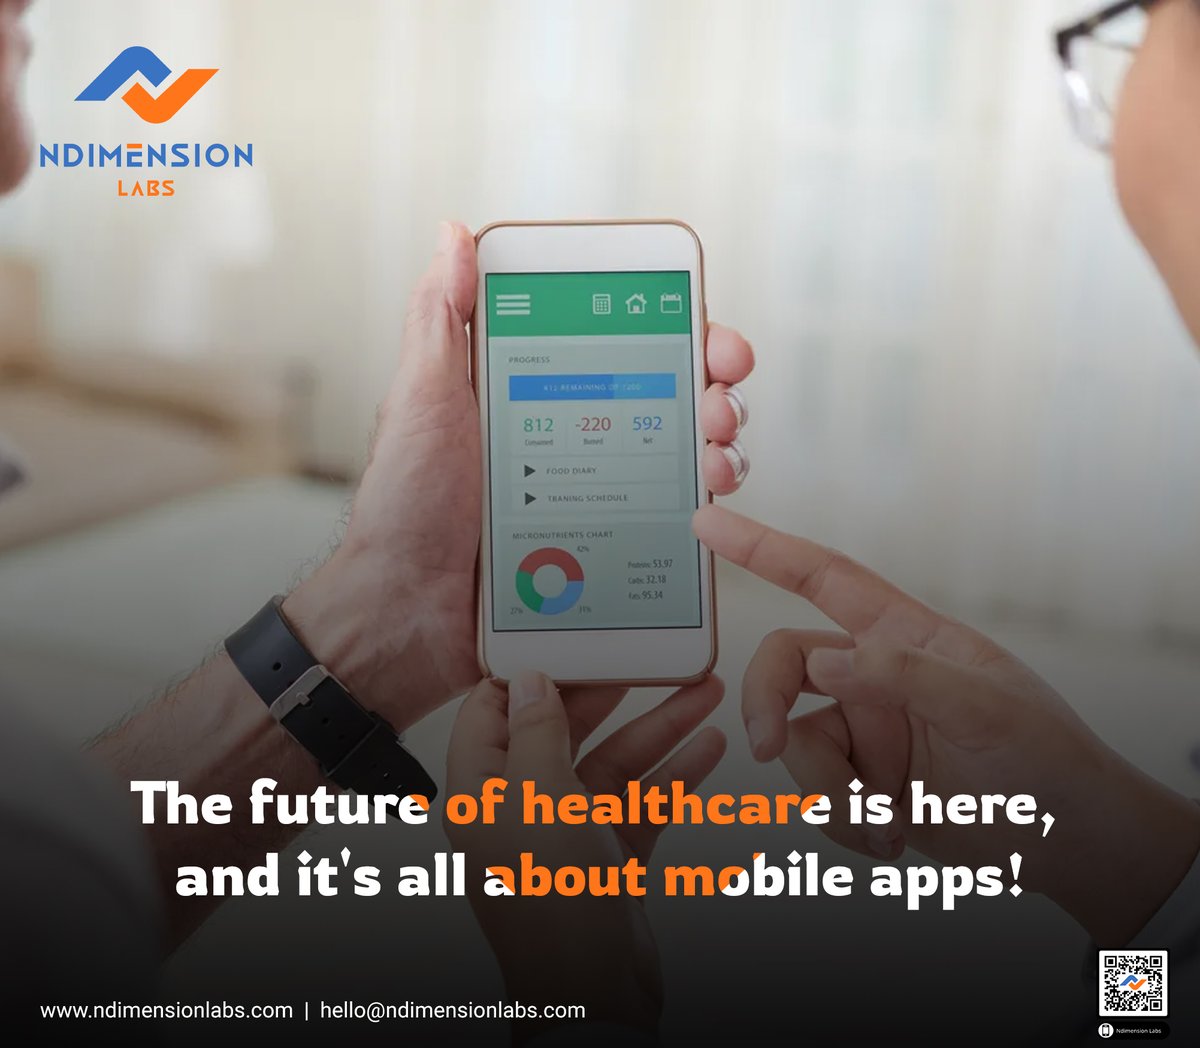 Exciting News in Healthcare Tech! 🚀

The future of healthcare is here, and it's all about mobile apps! 

#MobileApps #HealthcareInnovation #DigitalHealth #FutureOfHealthcare #HealthcareIndustry #PatientCentricCare #HealthTech